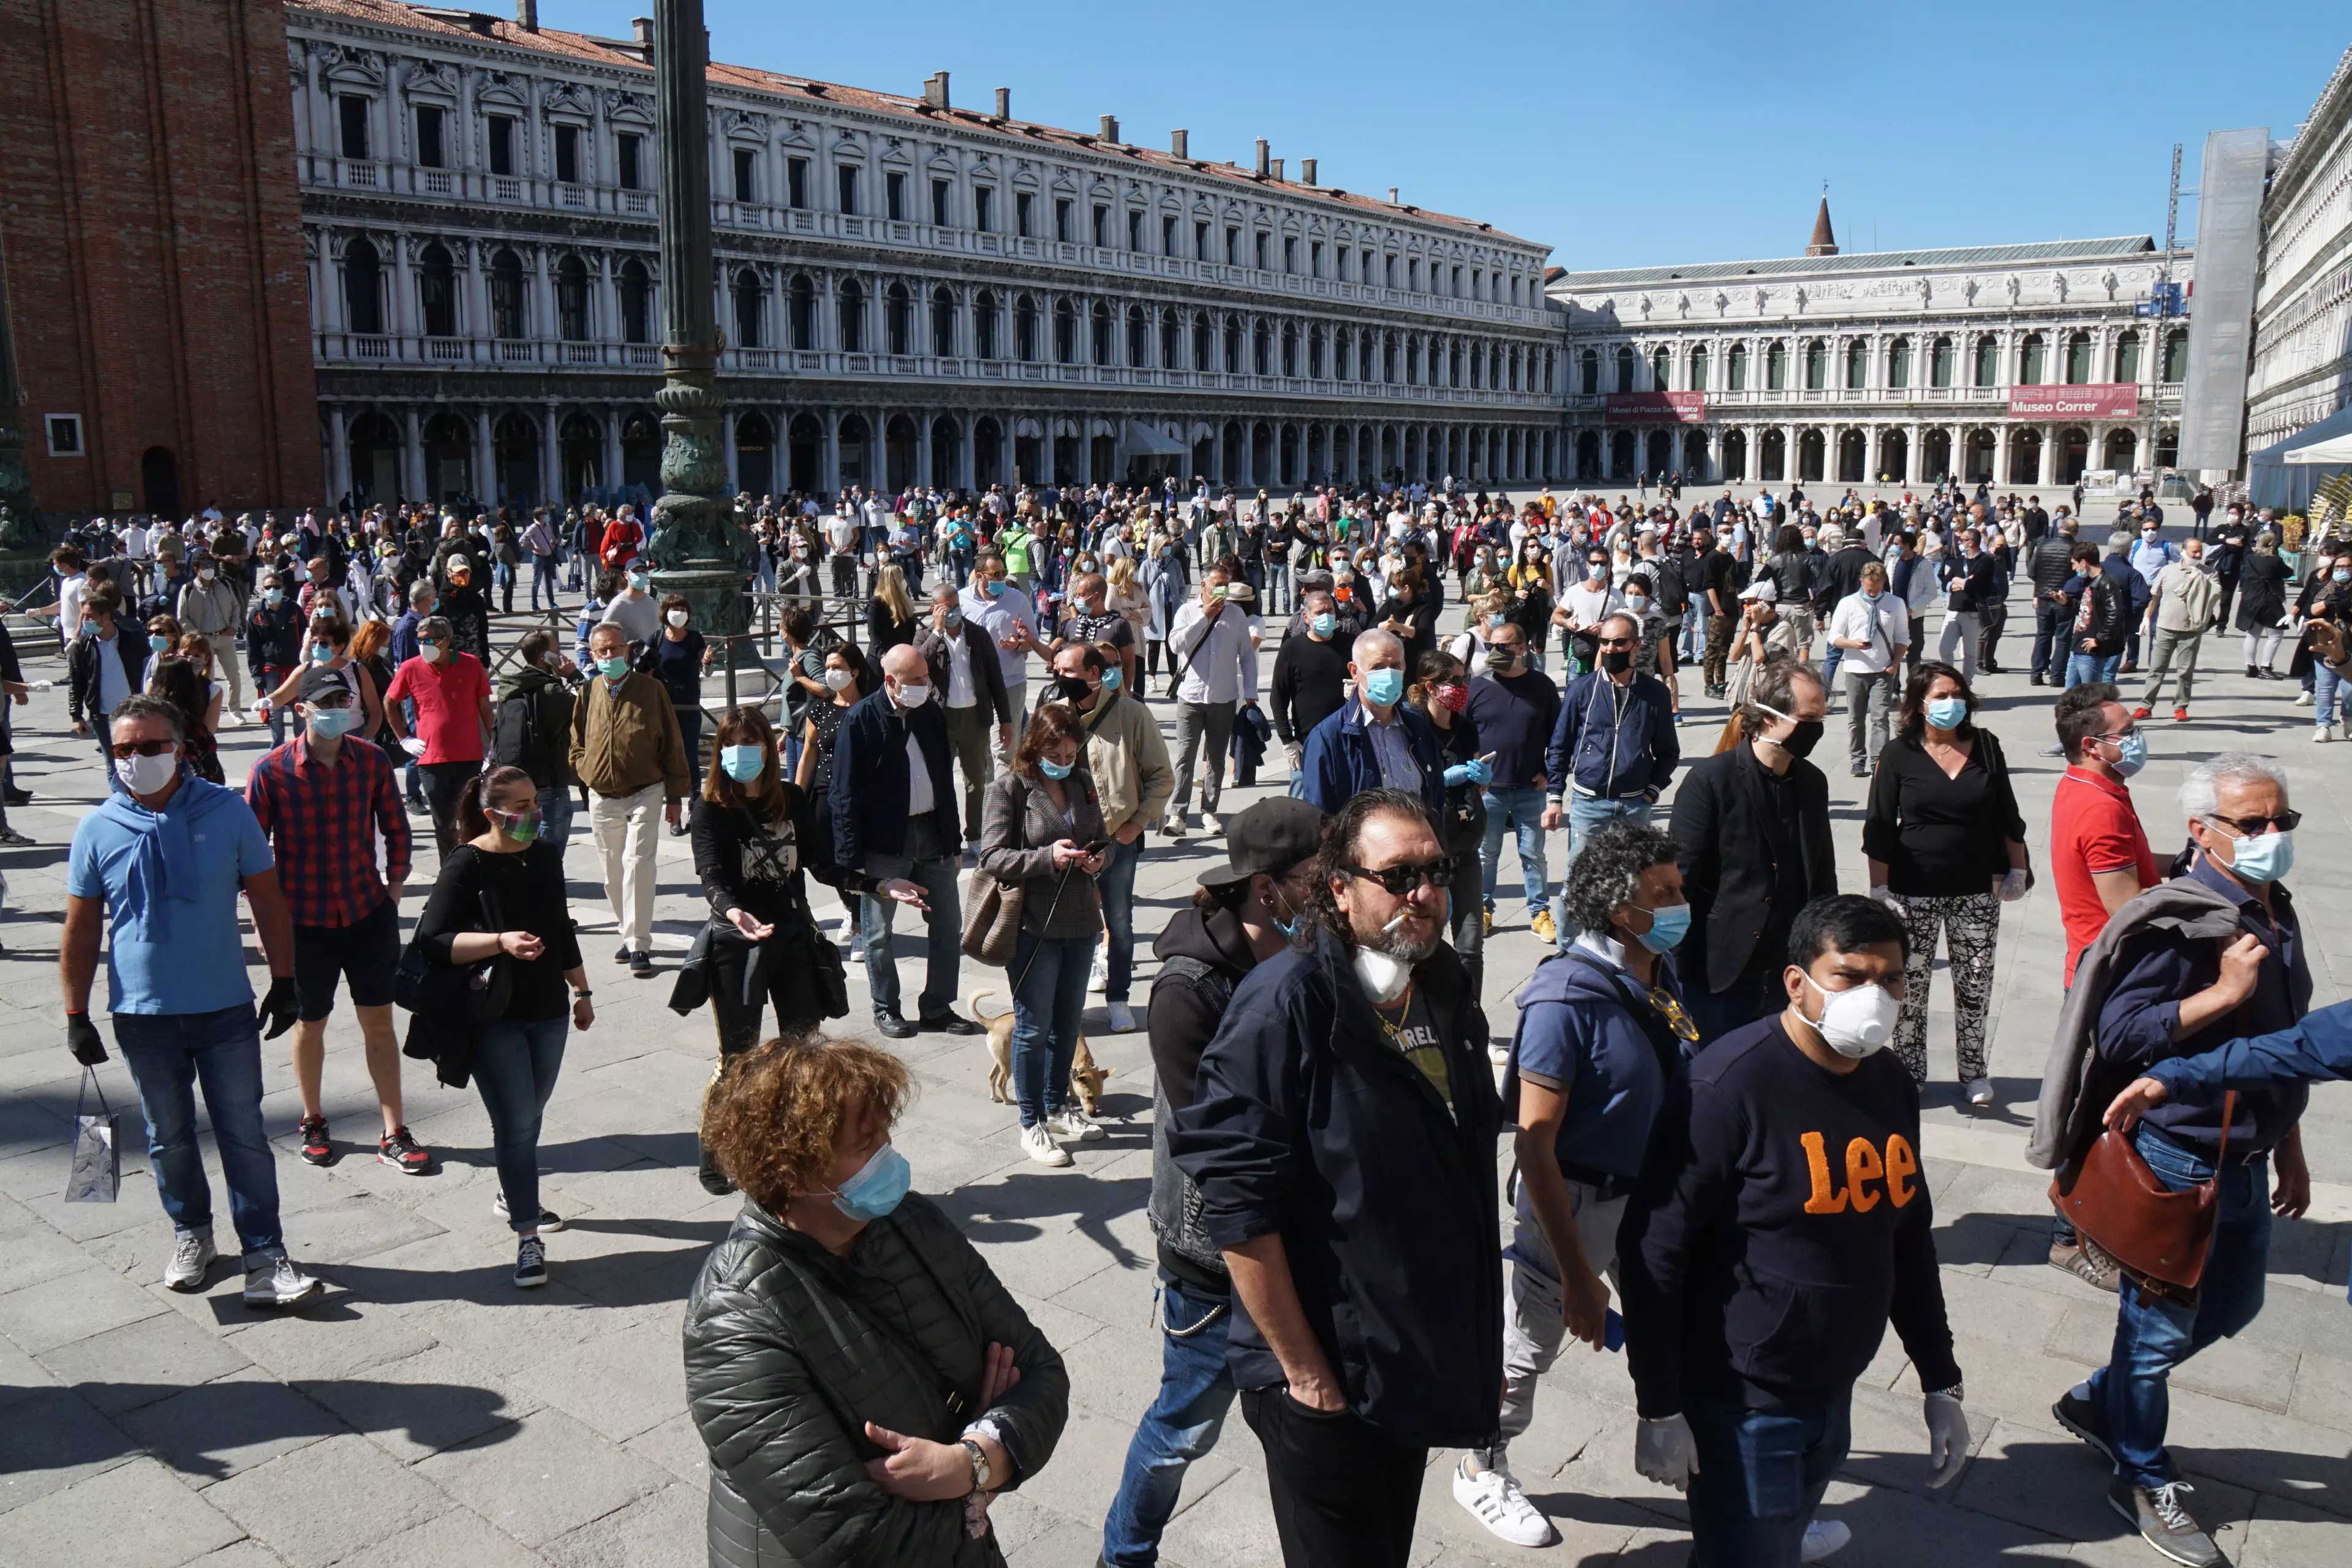 Shopkeepers gathered in St. Marks's square today (4 May) to petition for the reopening of stores.